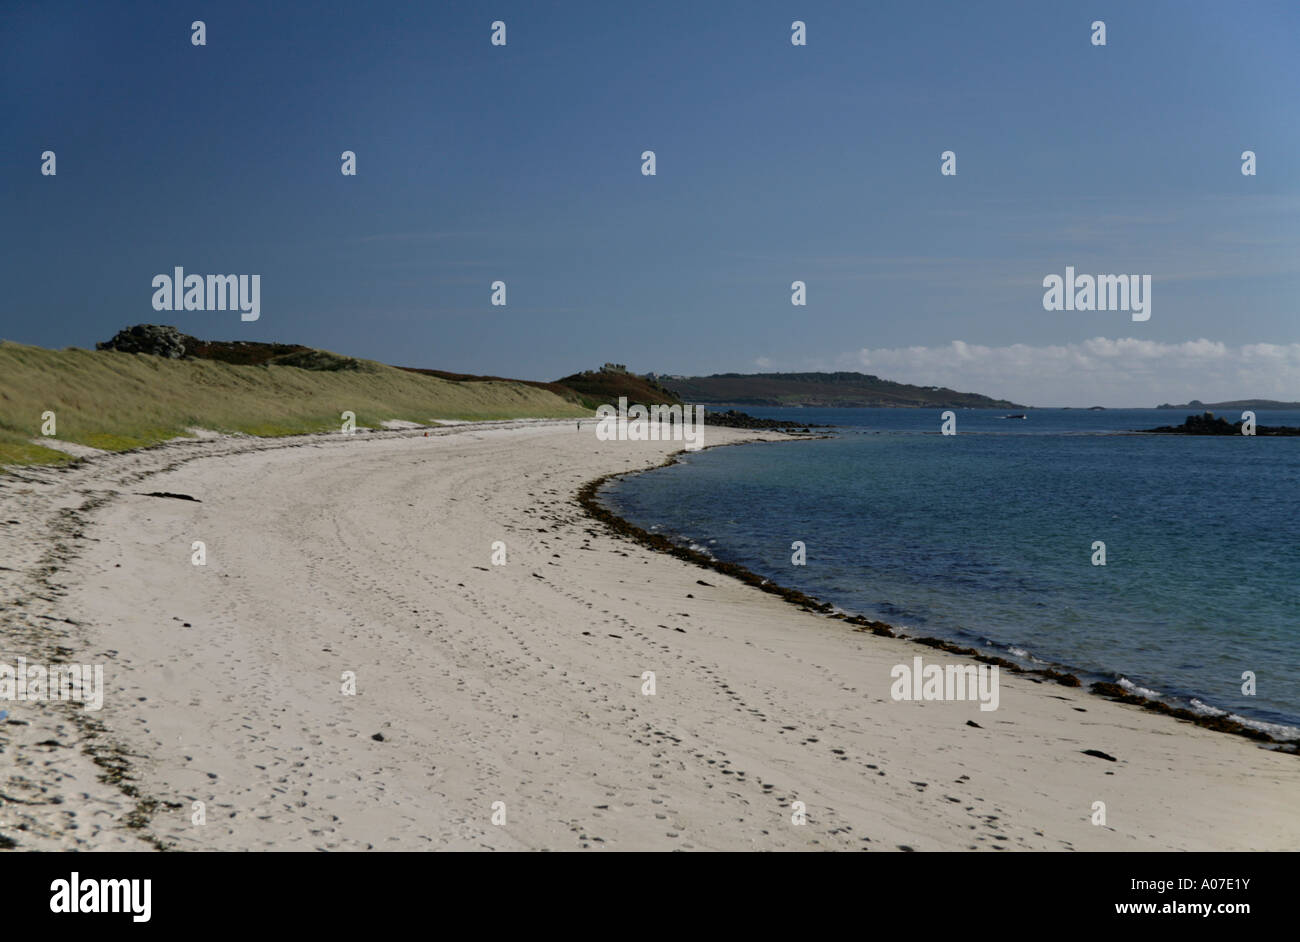 Stock photograph of Appletree Bay Tresco Scilly looking south Stock Photo